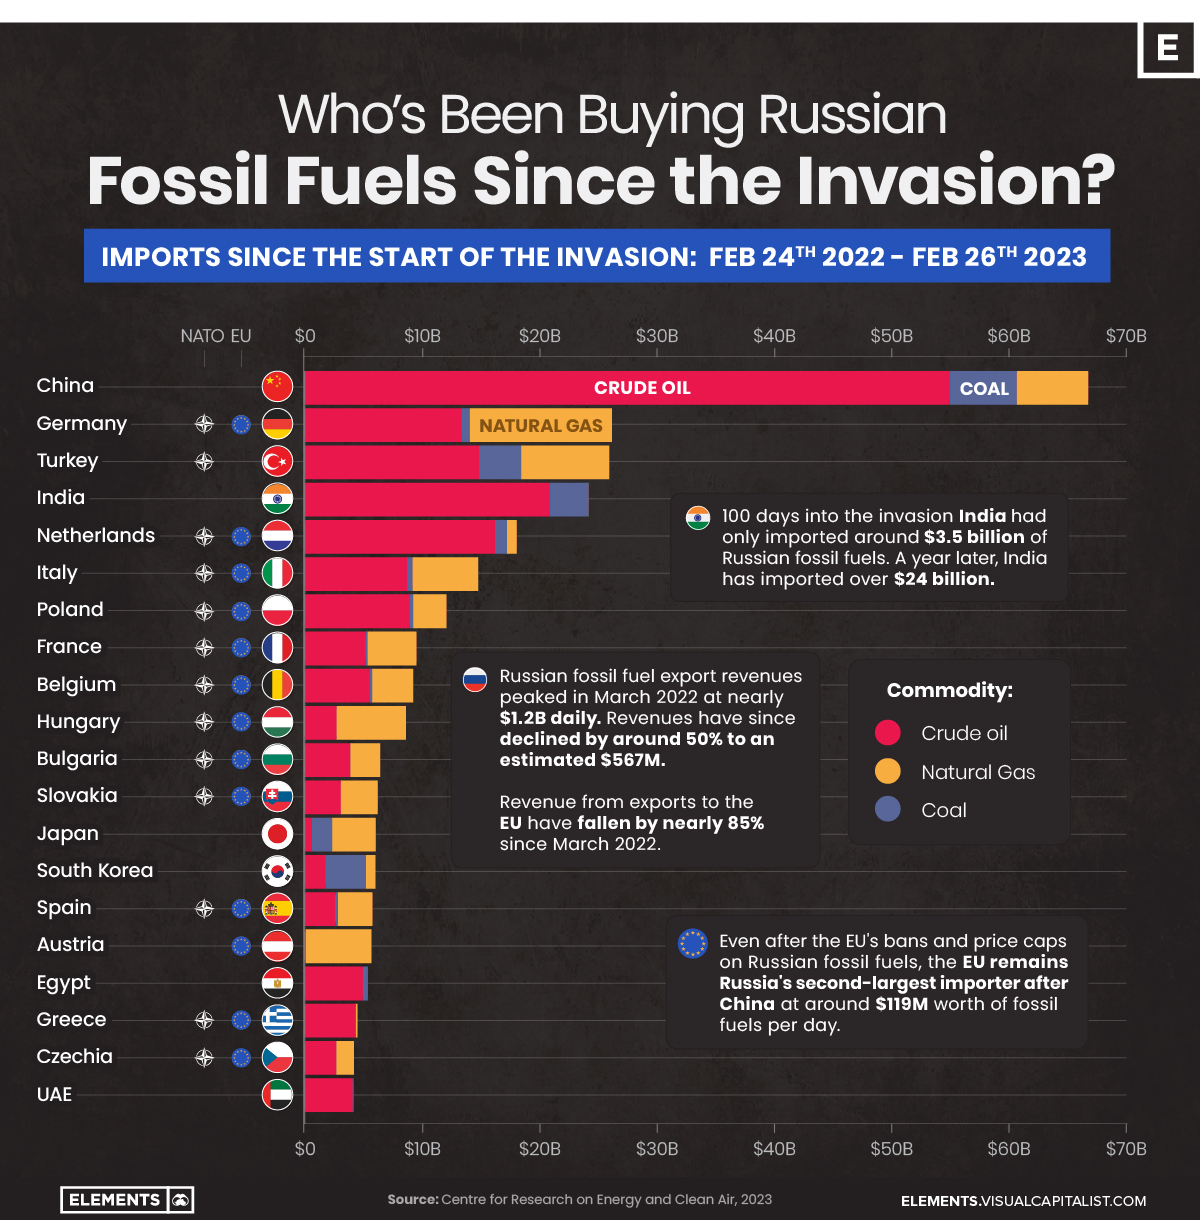 https://www.visualcapitalist.com/wp-content/uploads/2023/03/Whos-Been-Buying-Russian-Fossil-Fuels-Mar-1.jpg